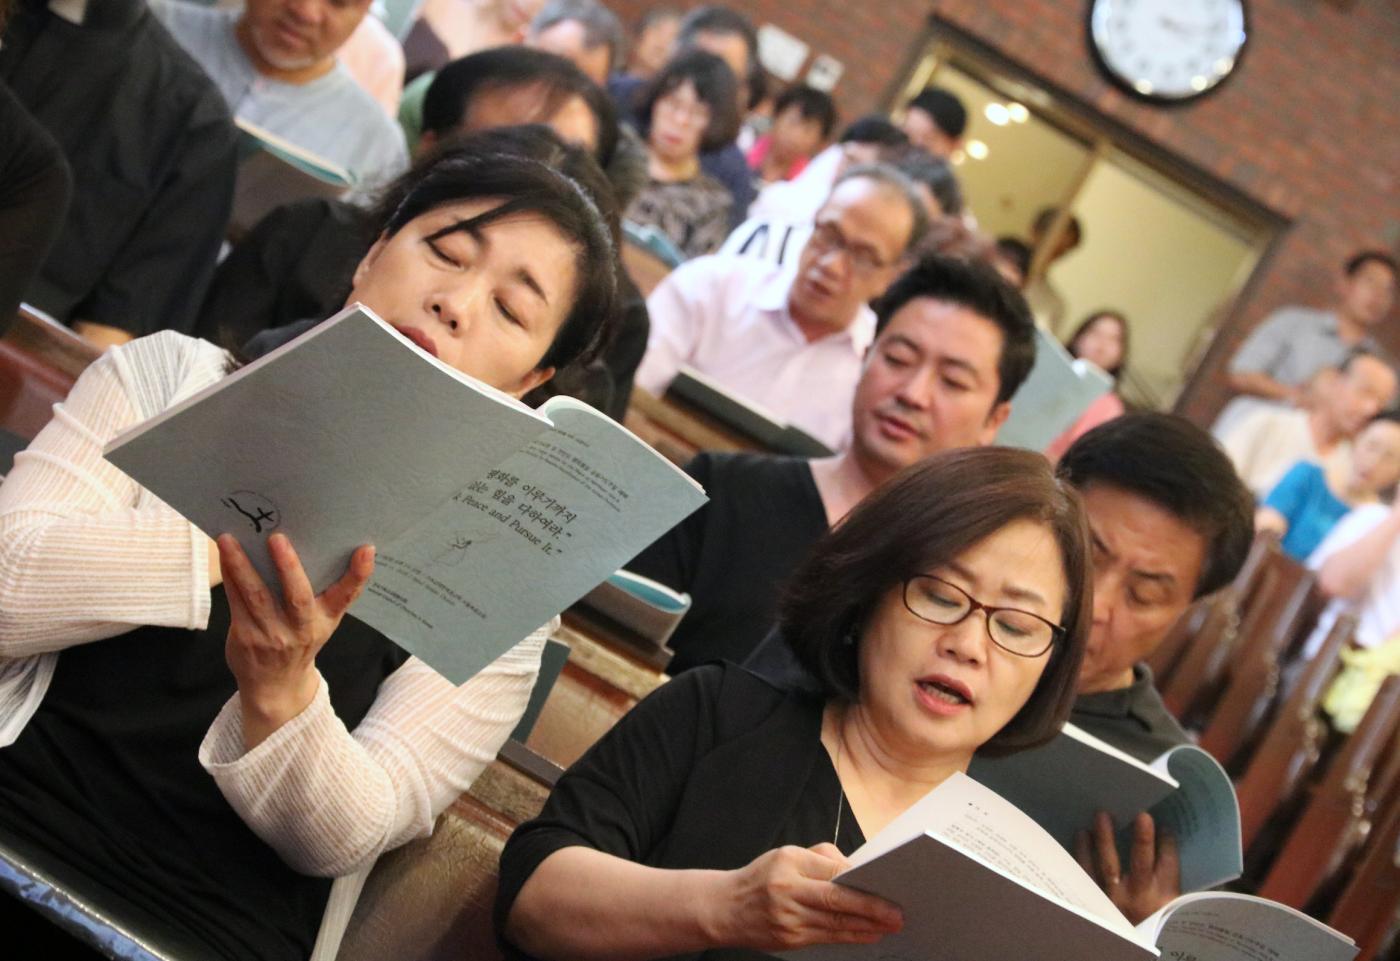 Congregation singing and praying in the church